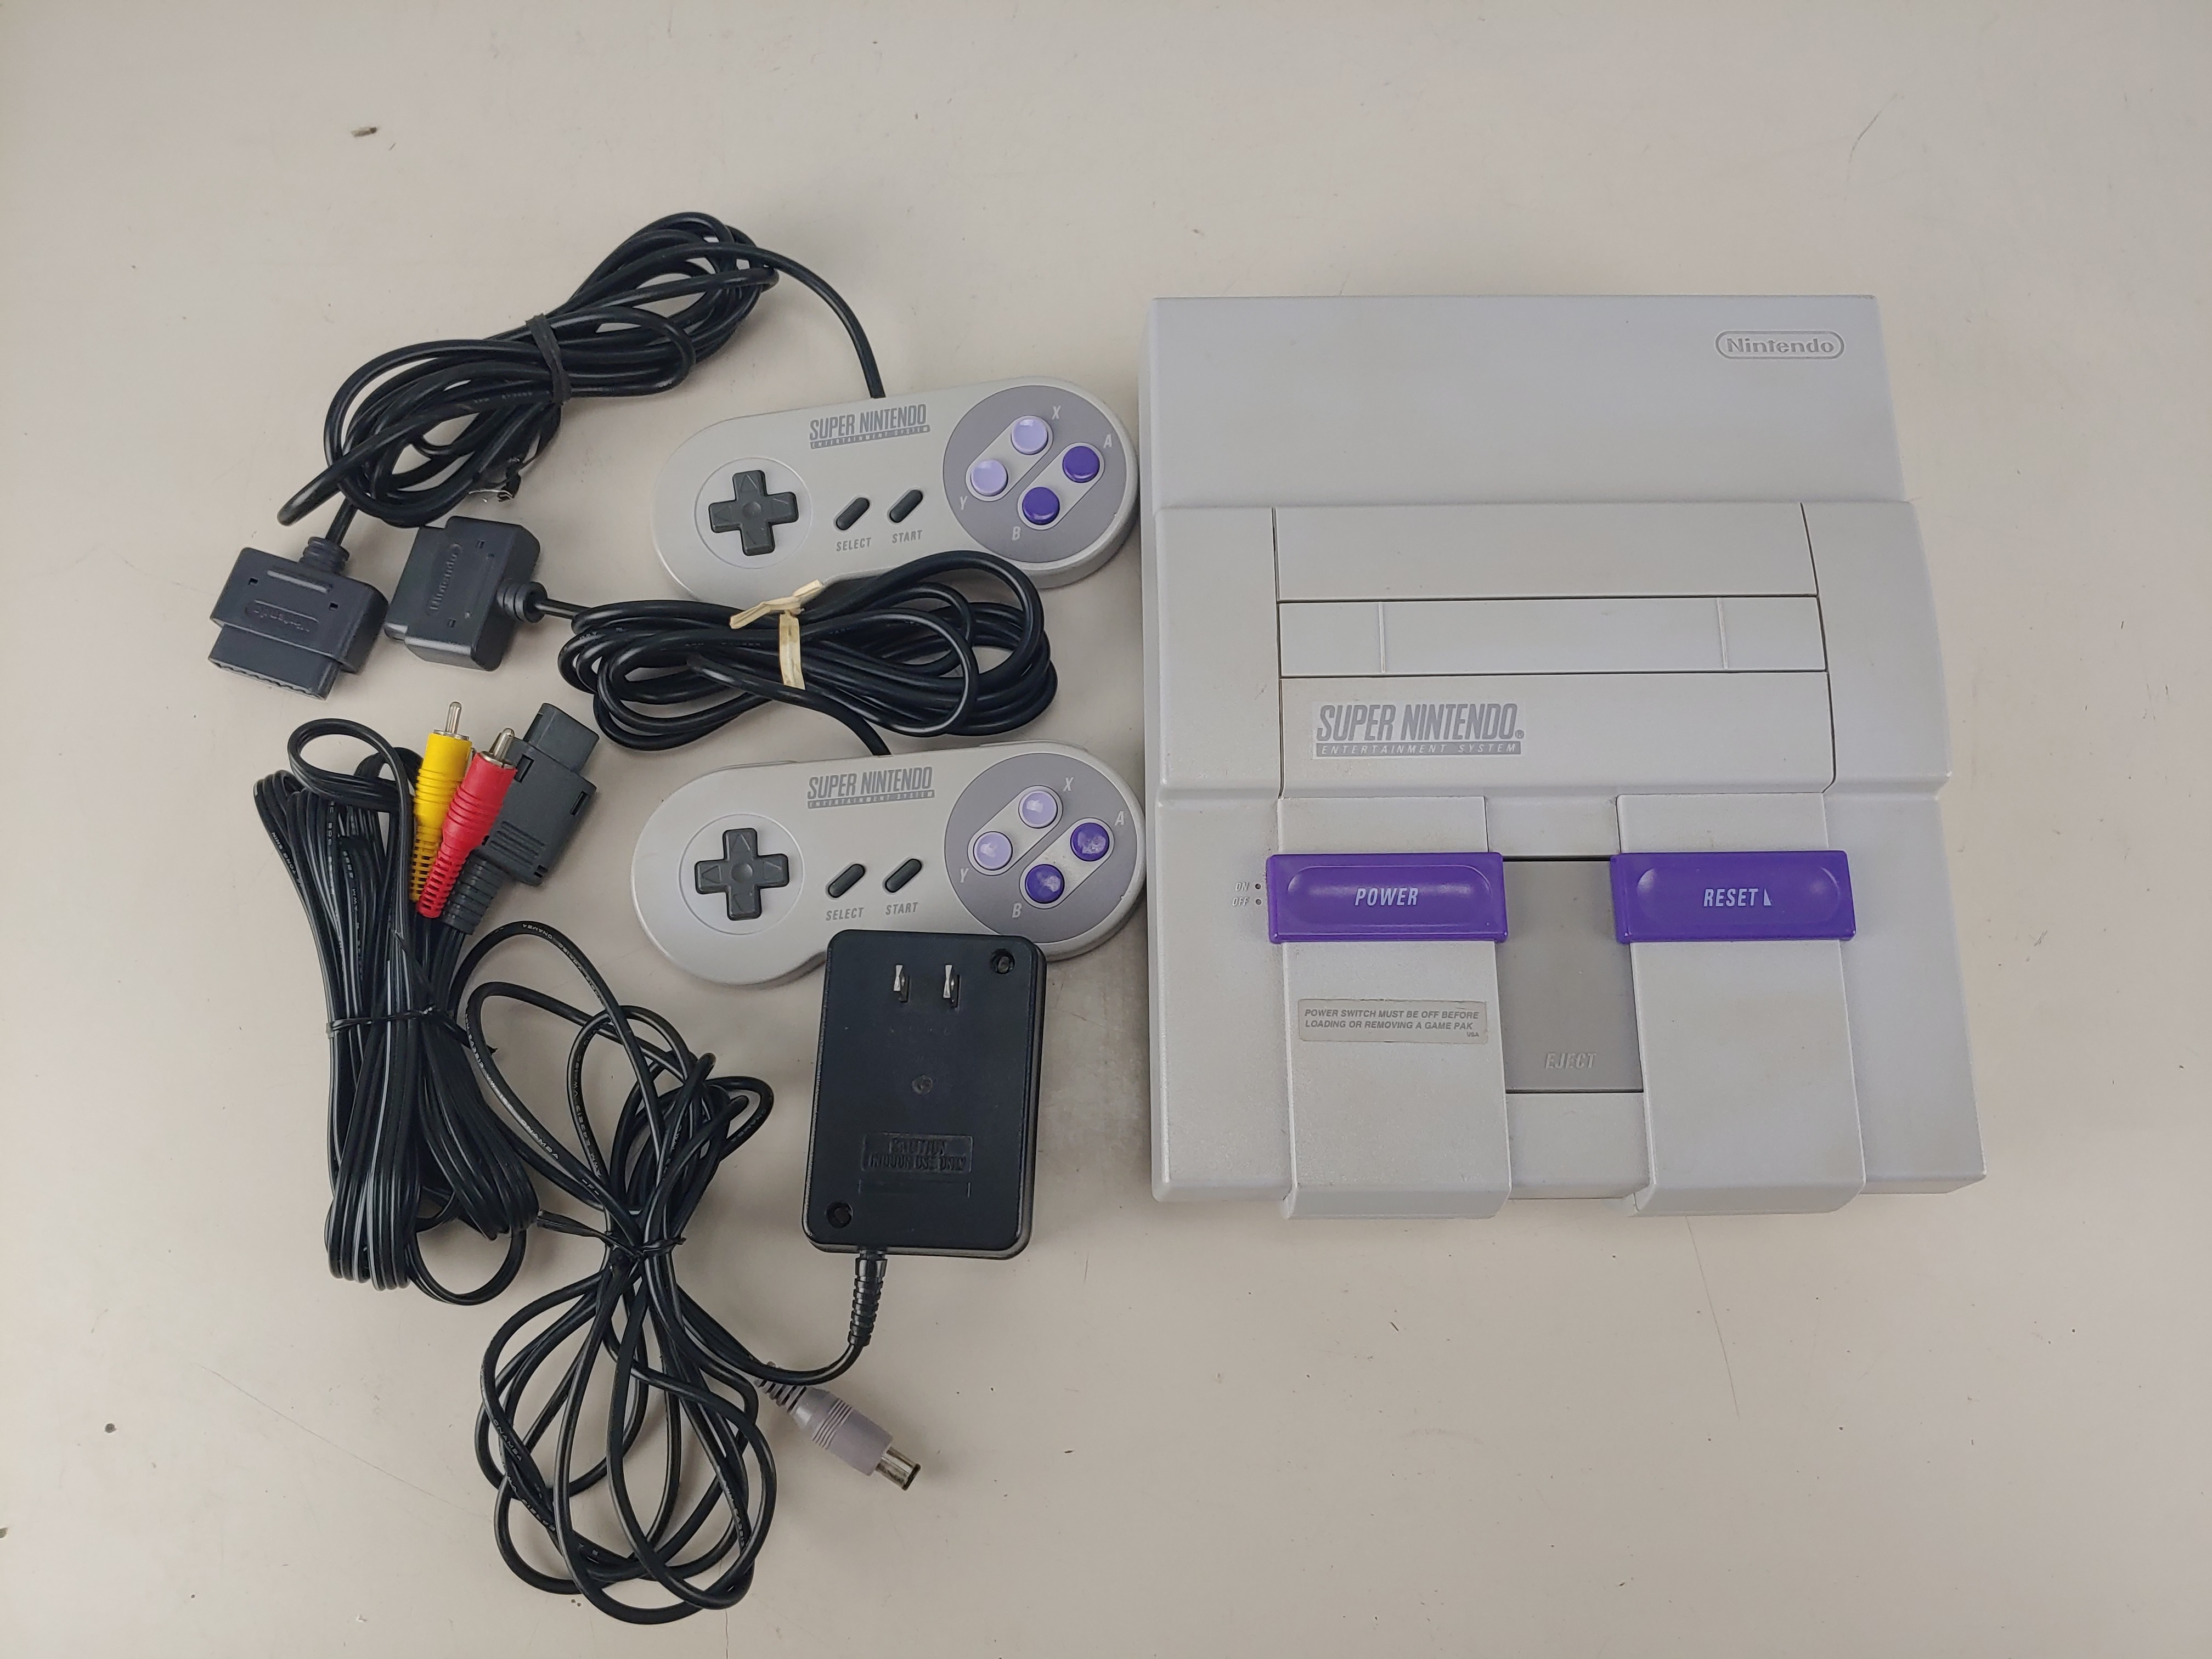 USED and Tested Super Nintendo Console with AC Adapter, RCA Cable, 2 SNES Controllers, and Instruction Booklet